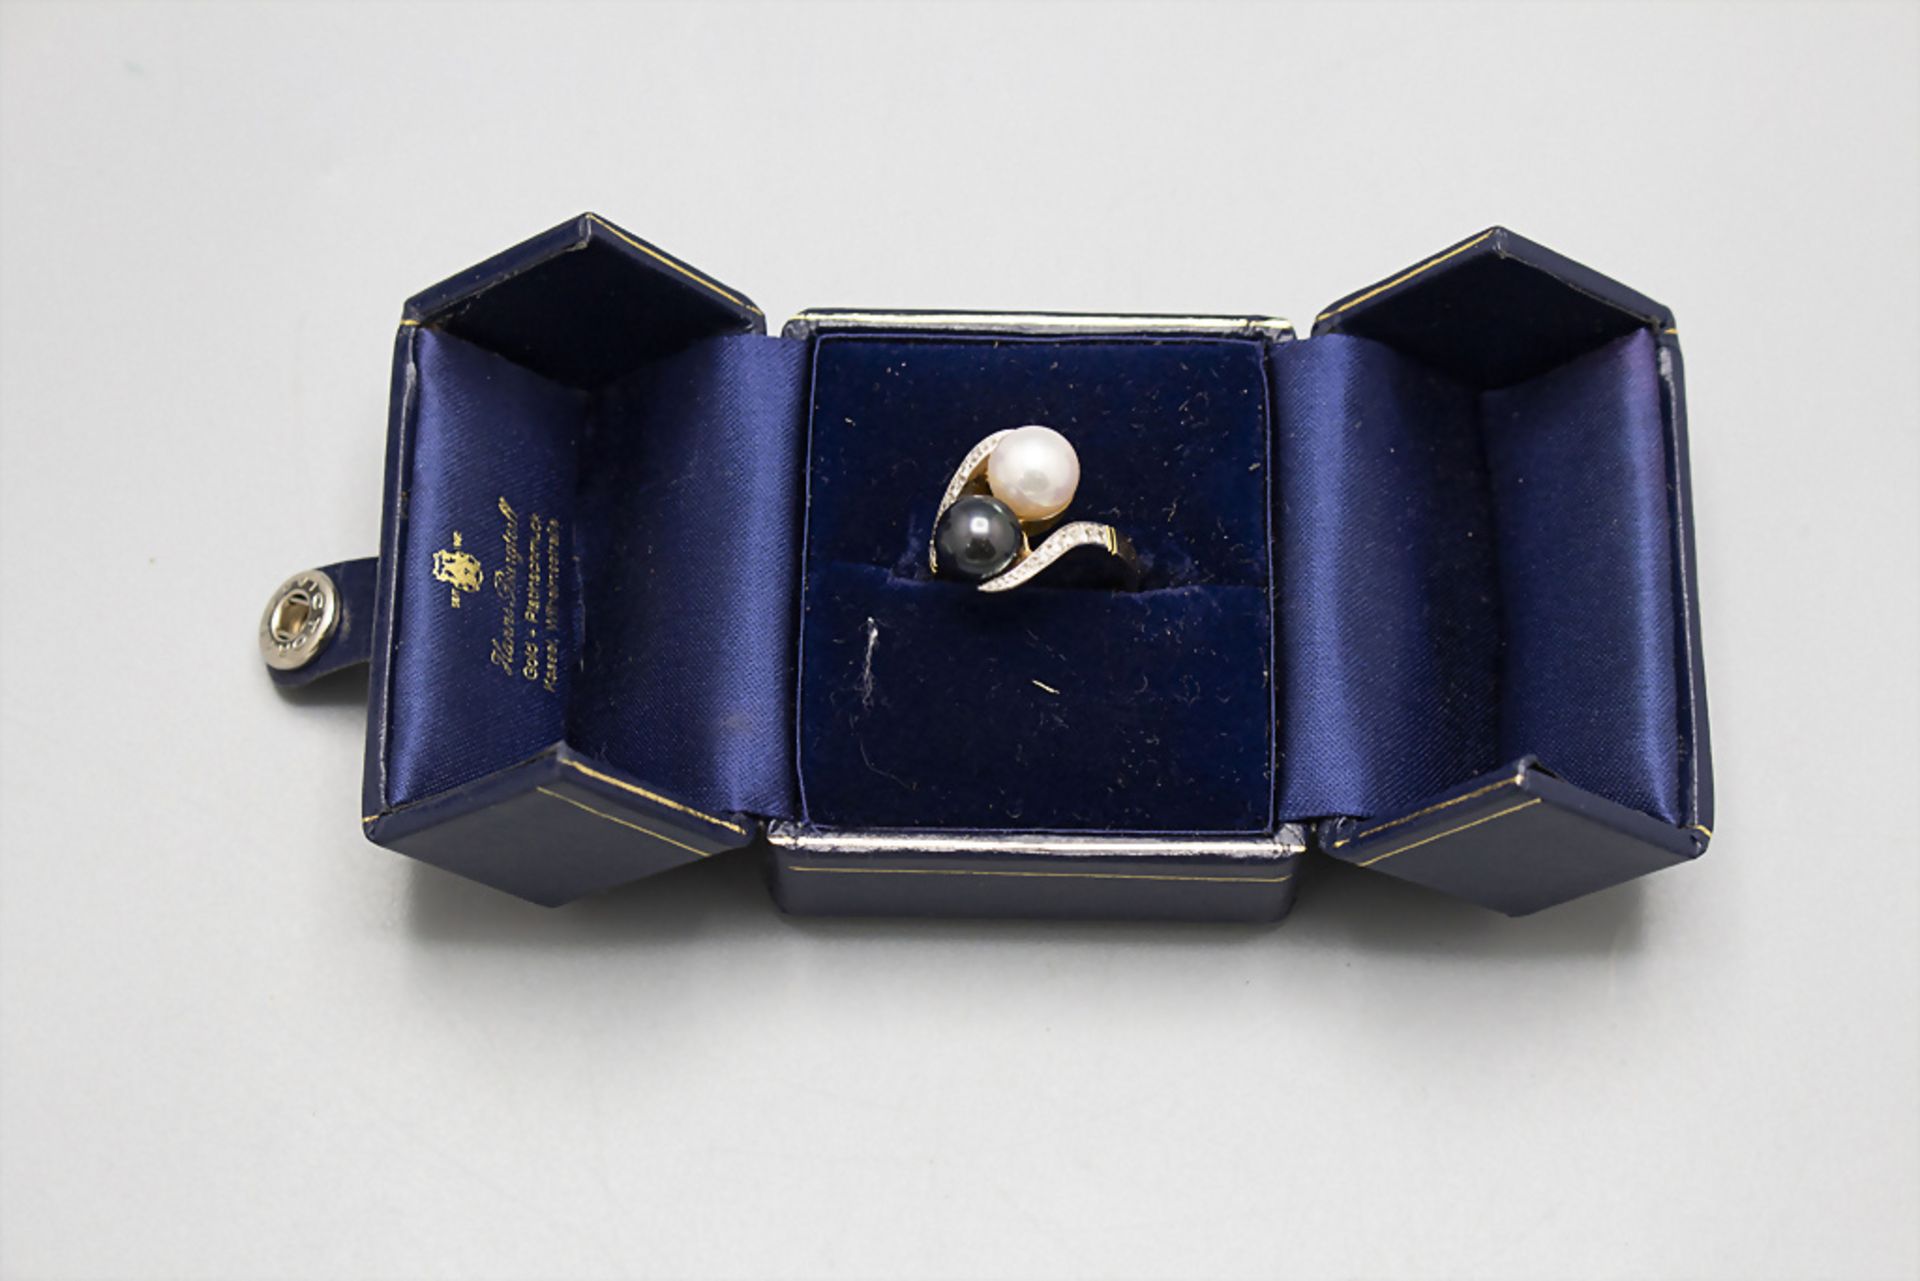 Damenring mit Perlen und Diamanten / A ladies 18 ct gold ring with diamonds and pearls - Image 4 of 4